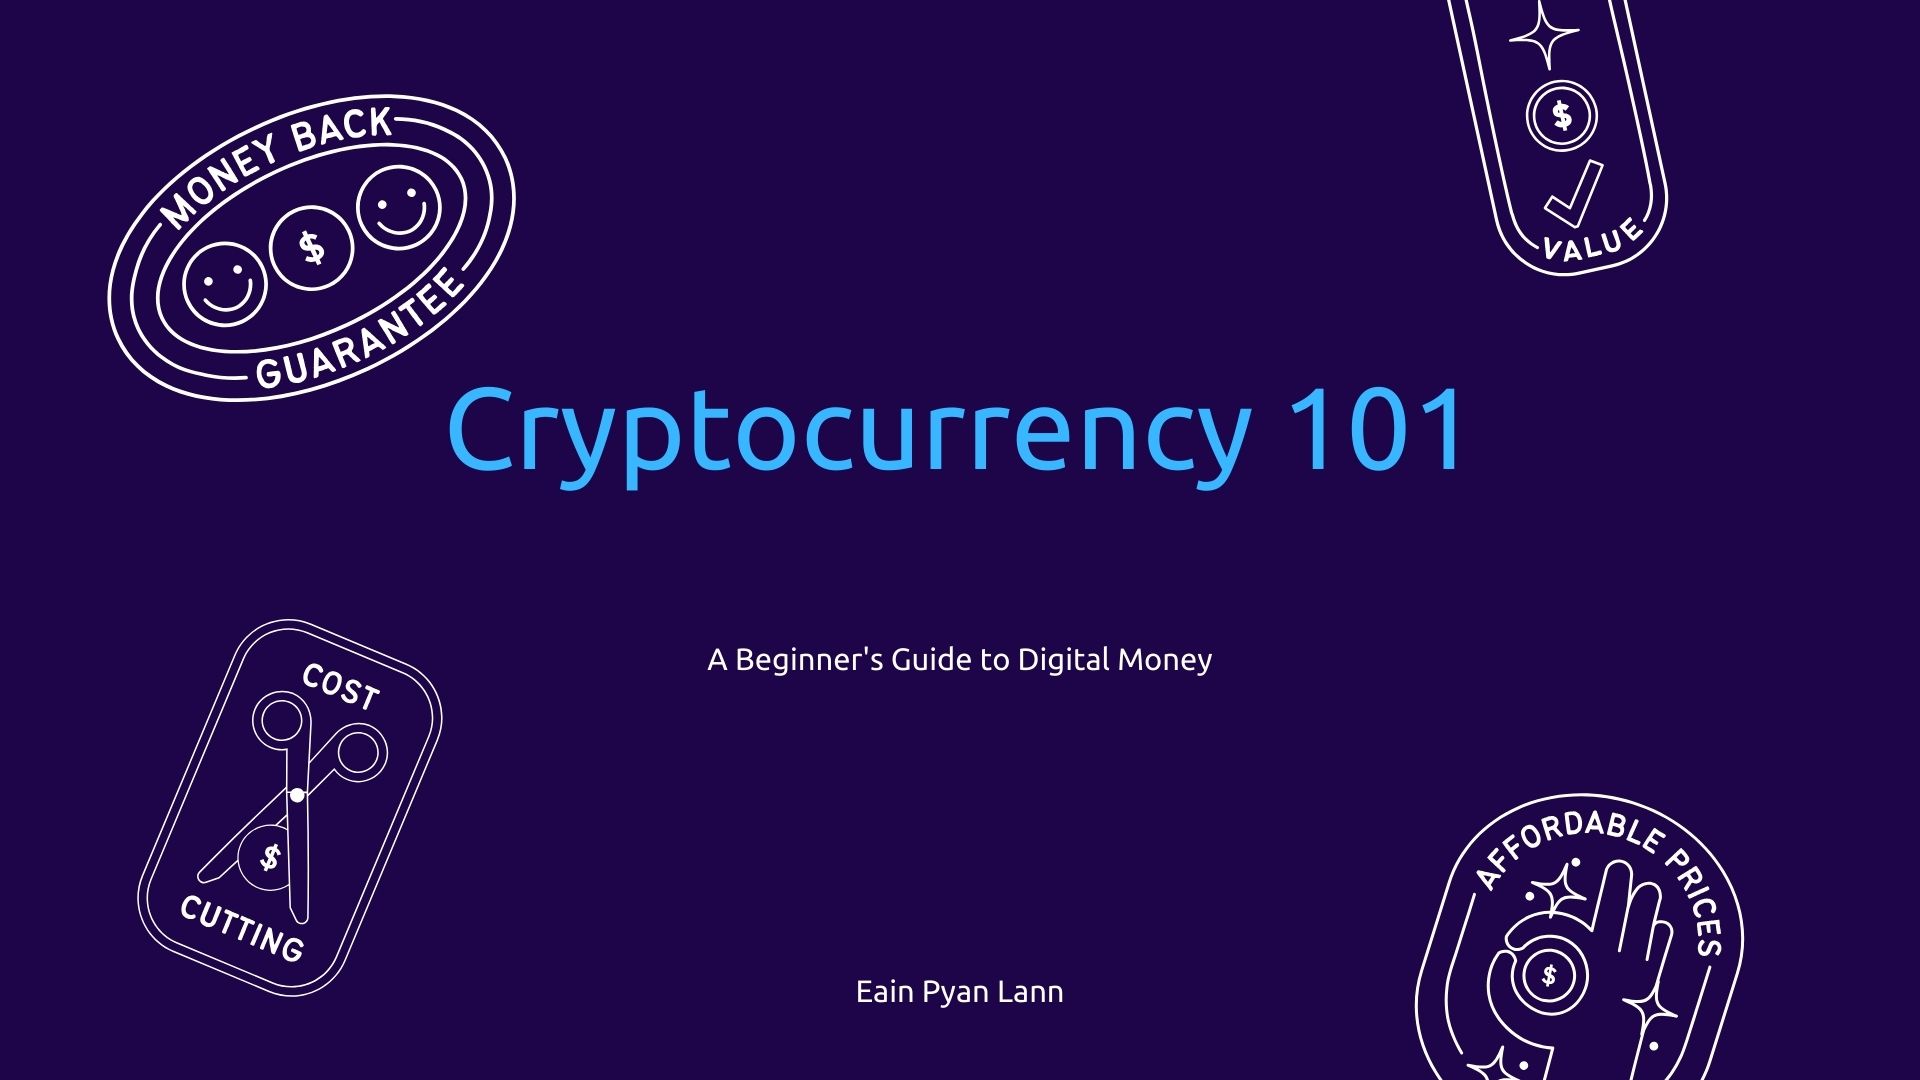 Cryptocurrency 101: A Beginner's Guide to Digital Money